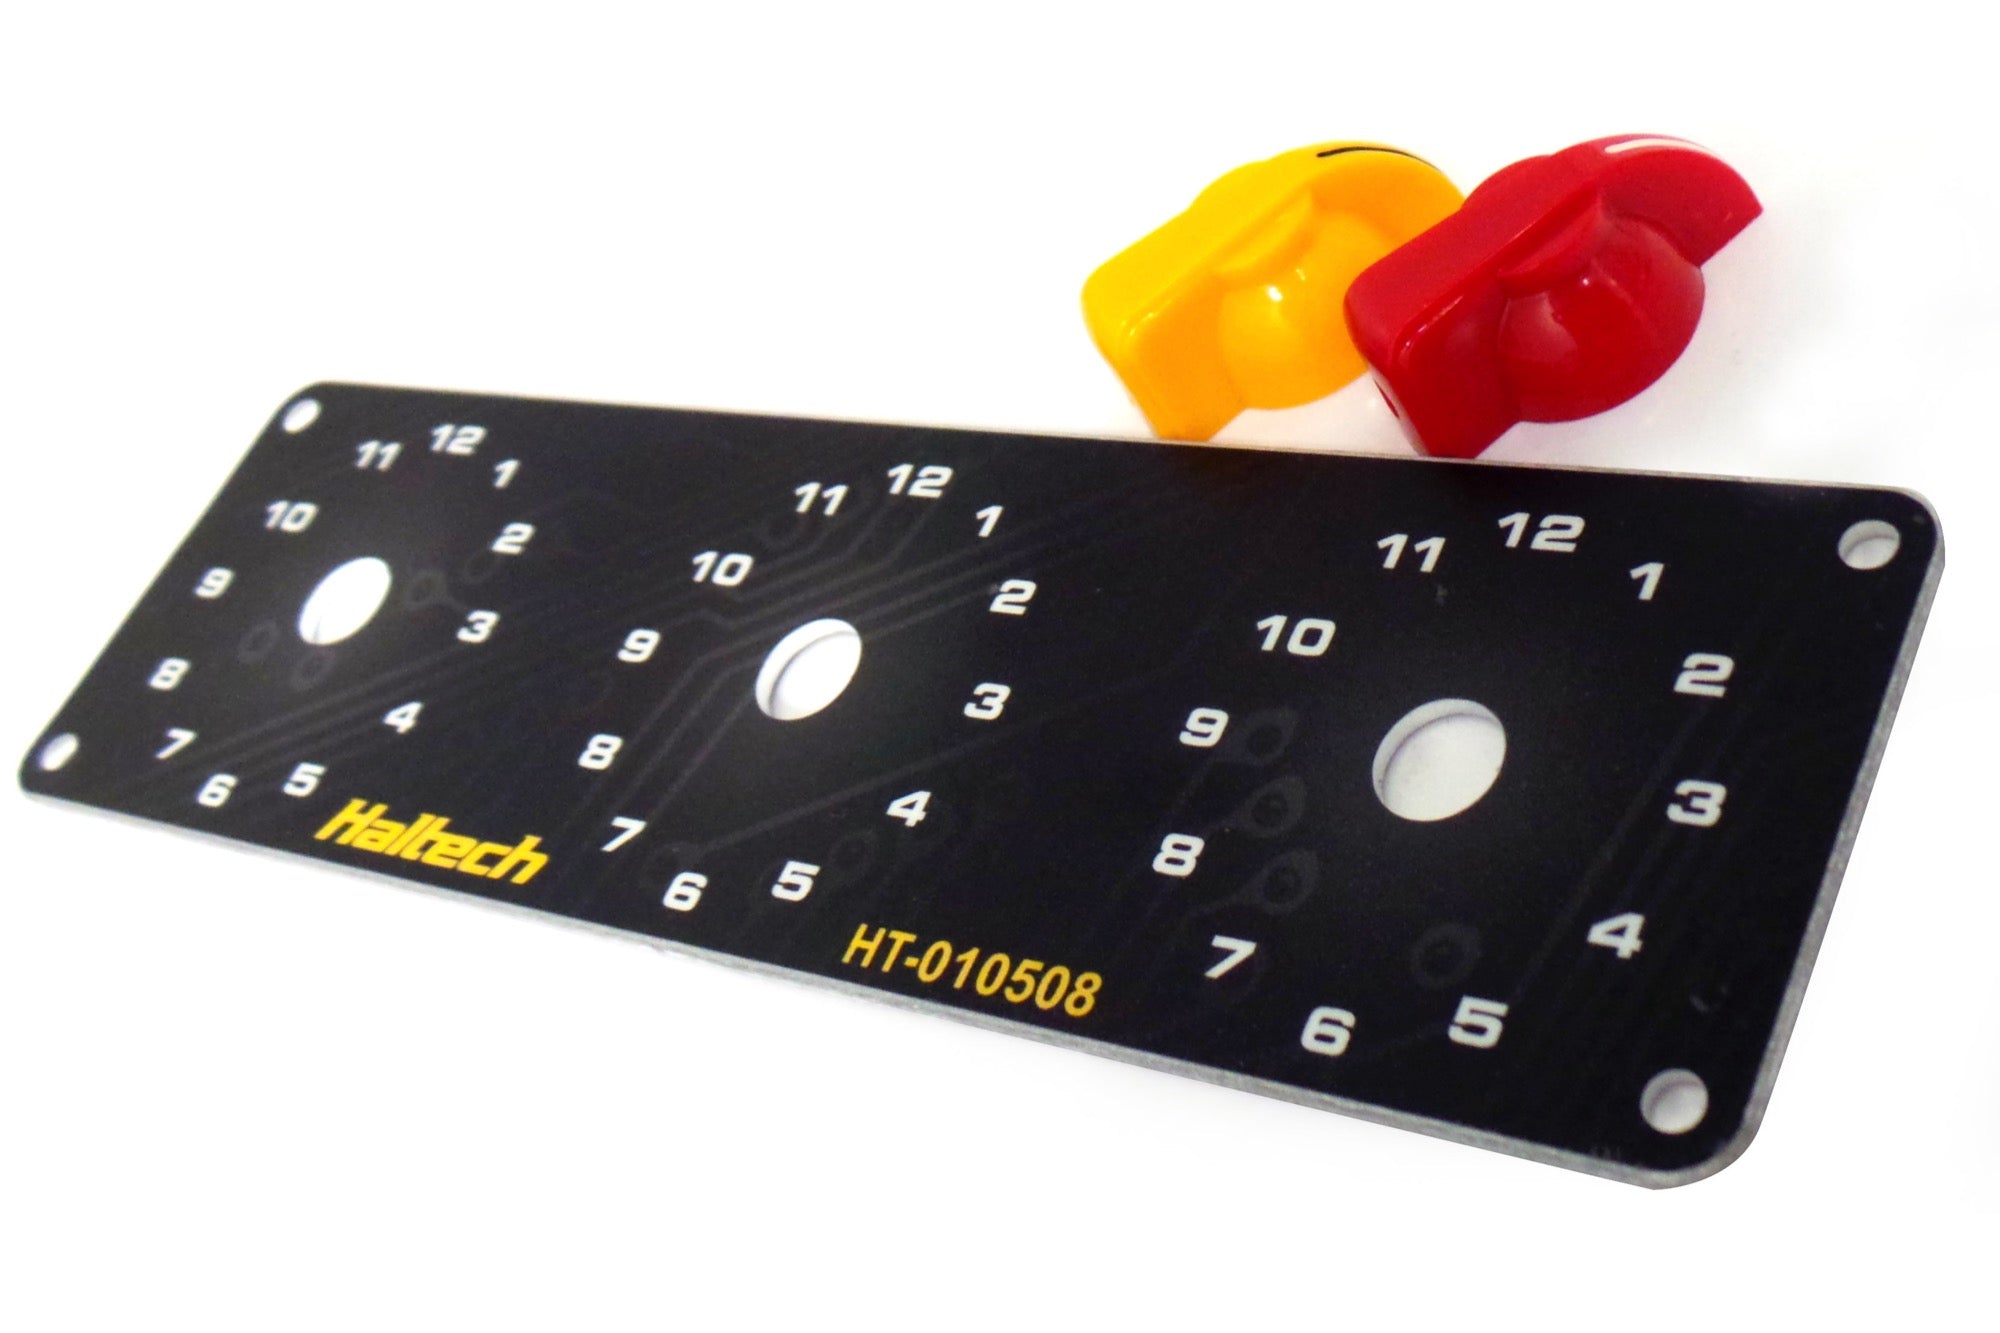 Haltech Triple Switch Panel Kit - includes Yellow & Red knobs HT-010510